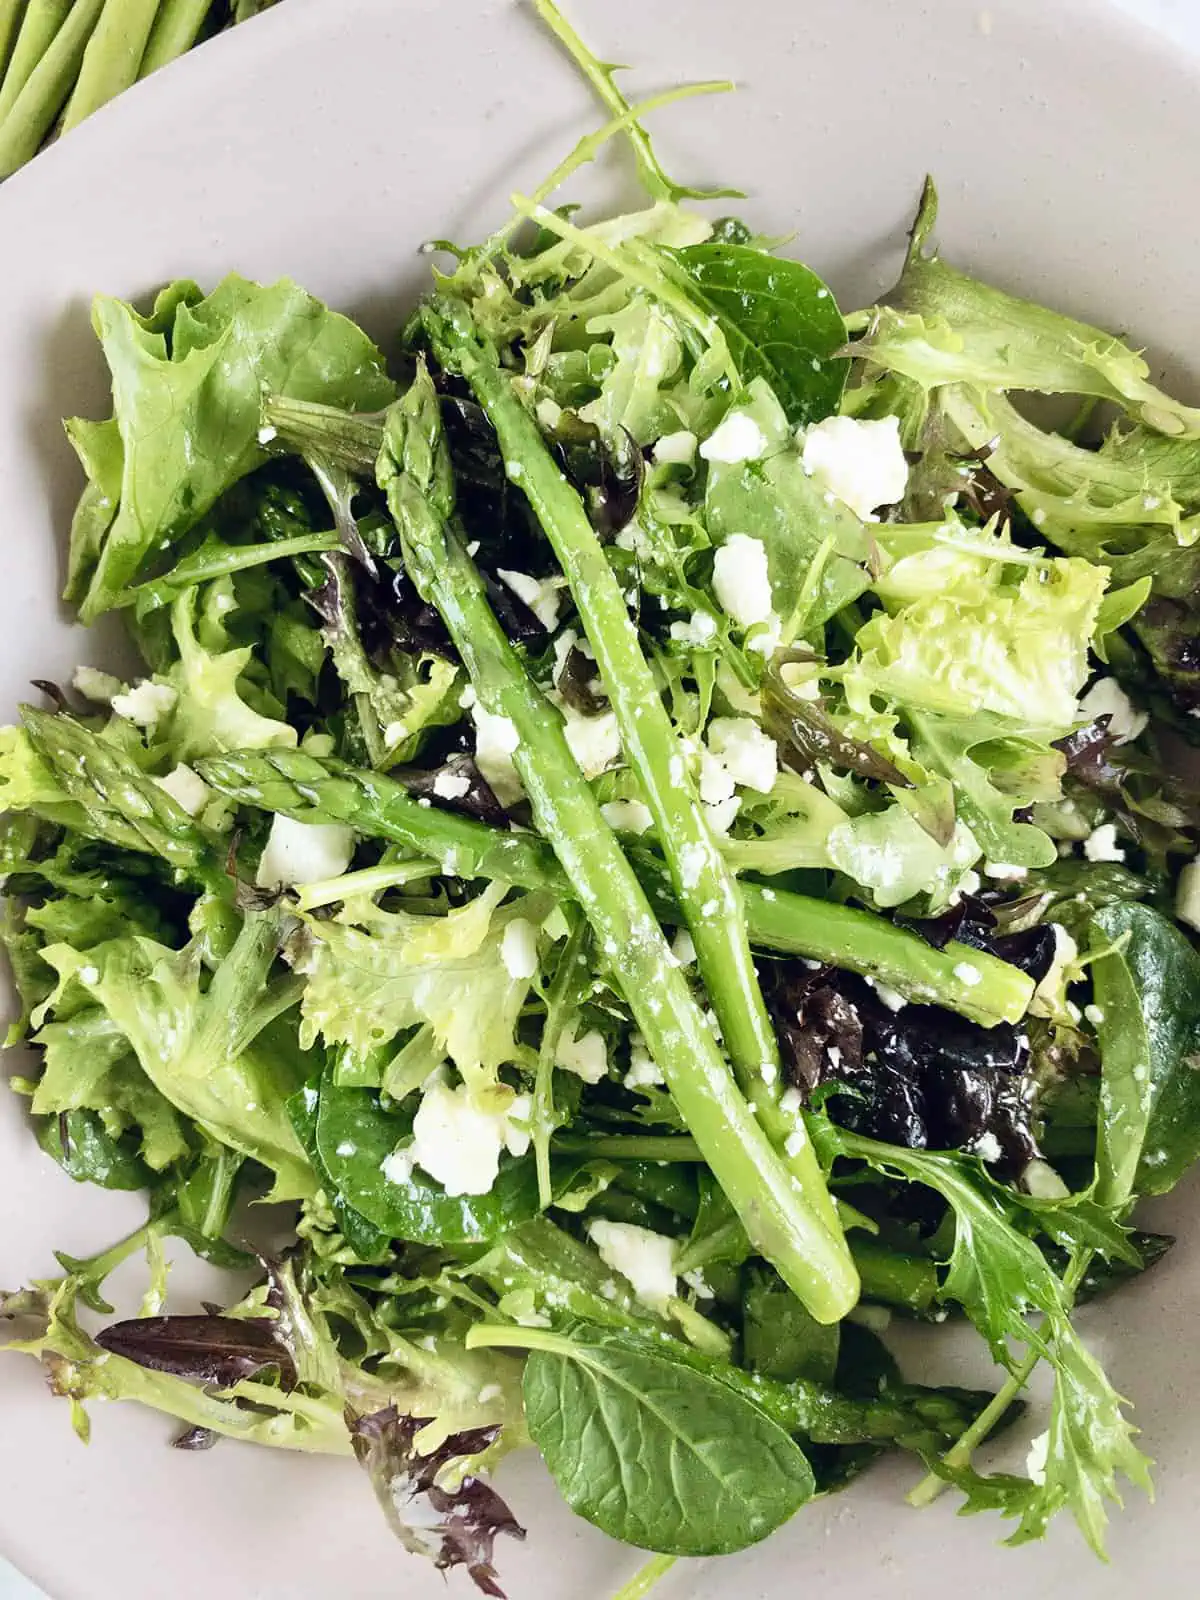 CLOSE-UP OF BLANCHED ASPARAGUS AND FETA SALAD